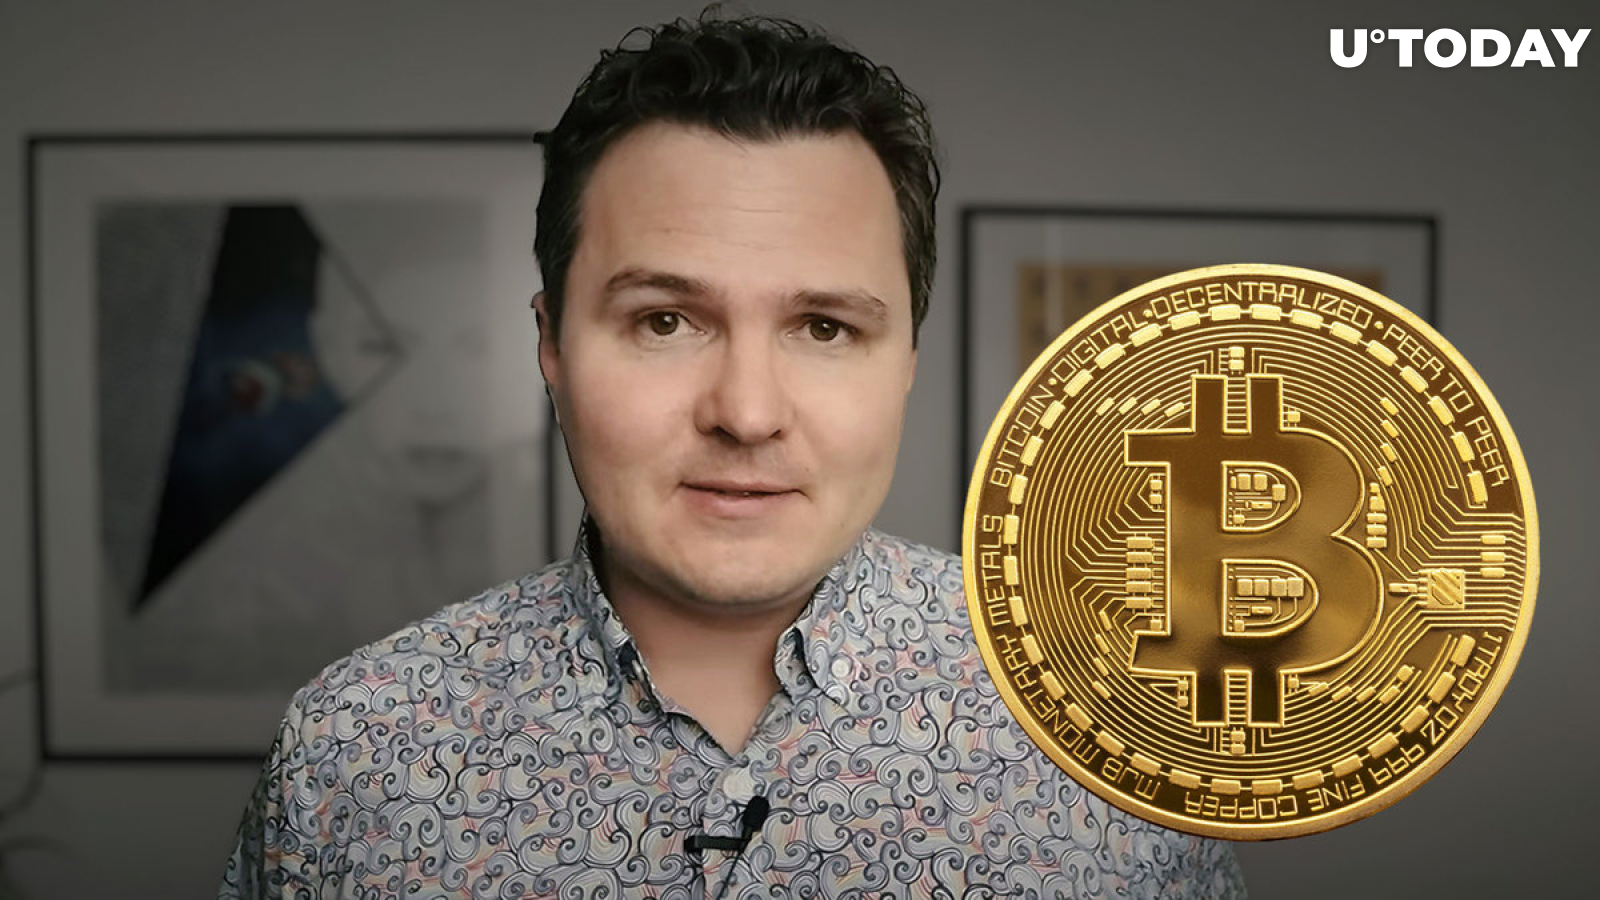 Influencer Lark Davis Makes Bitcoin Price Prediction — $1 Million — But There's a Catch